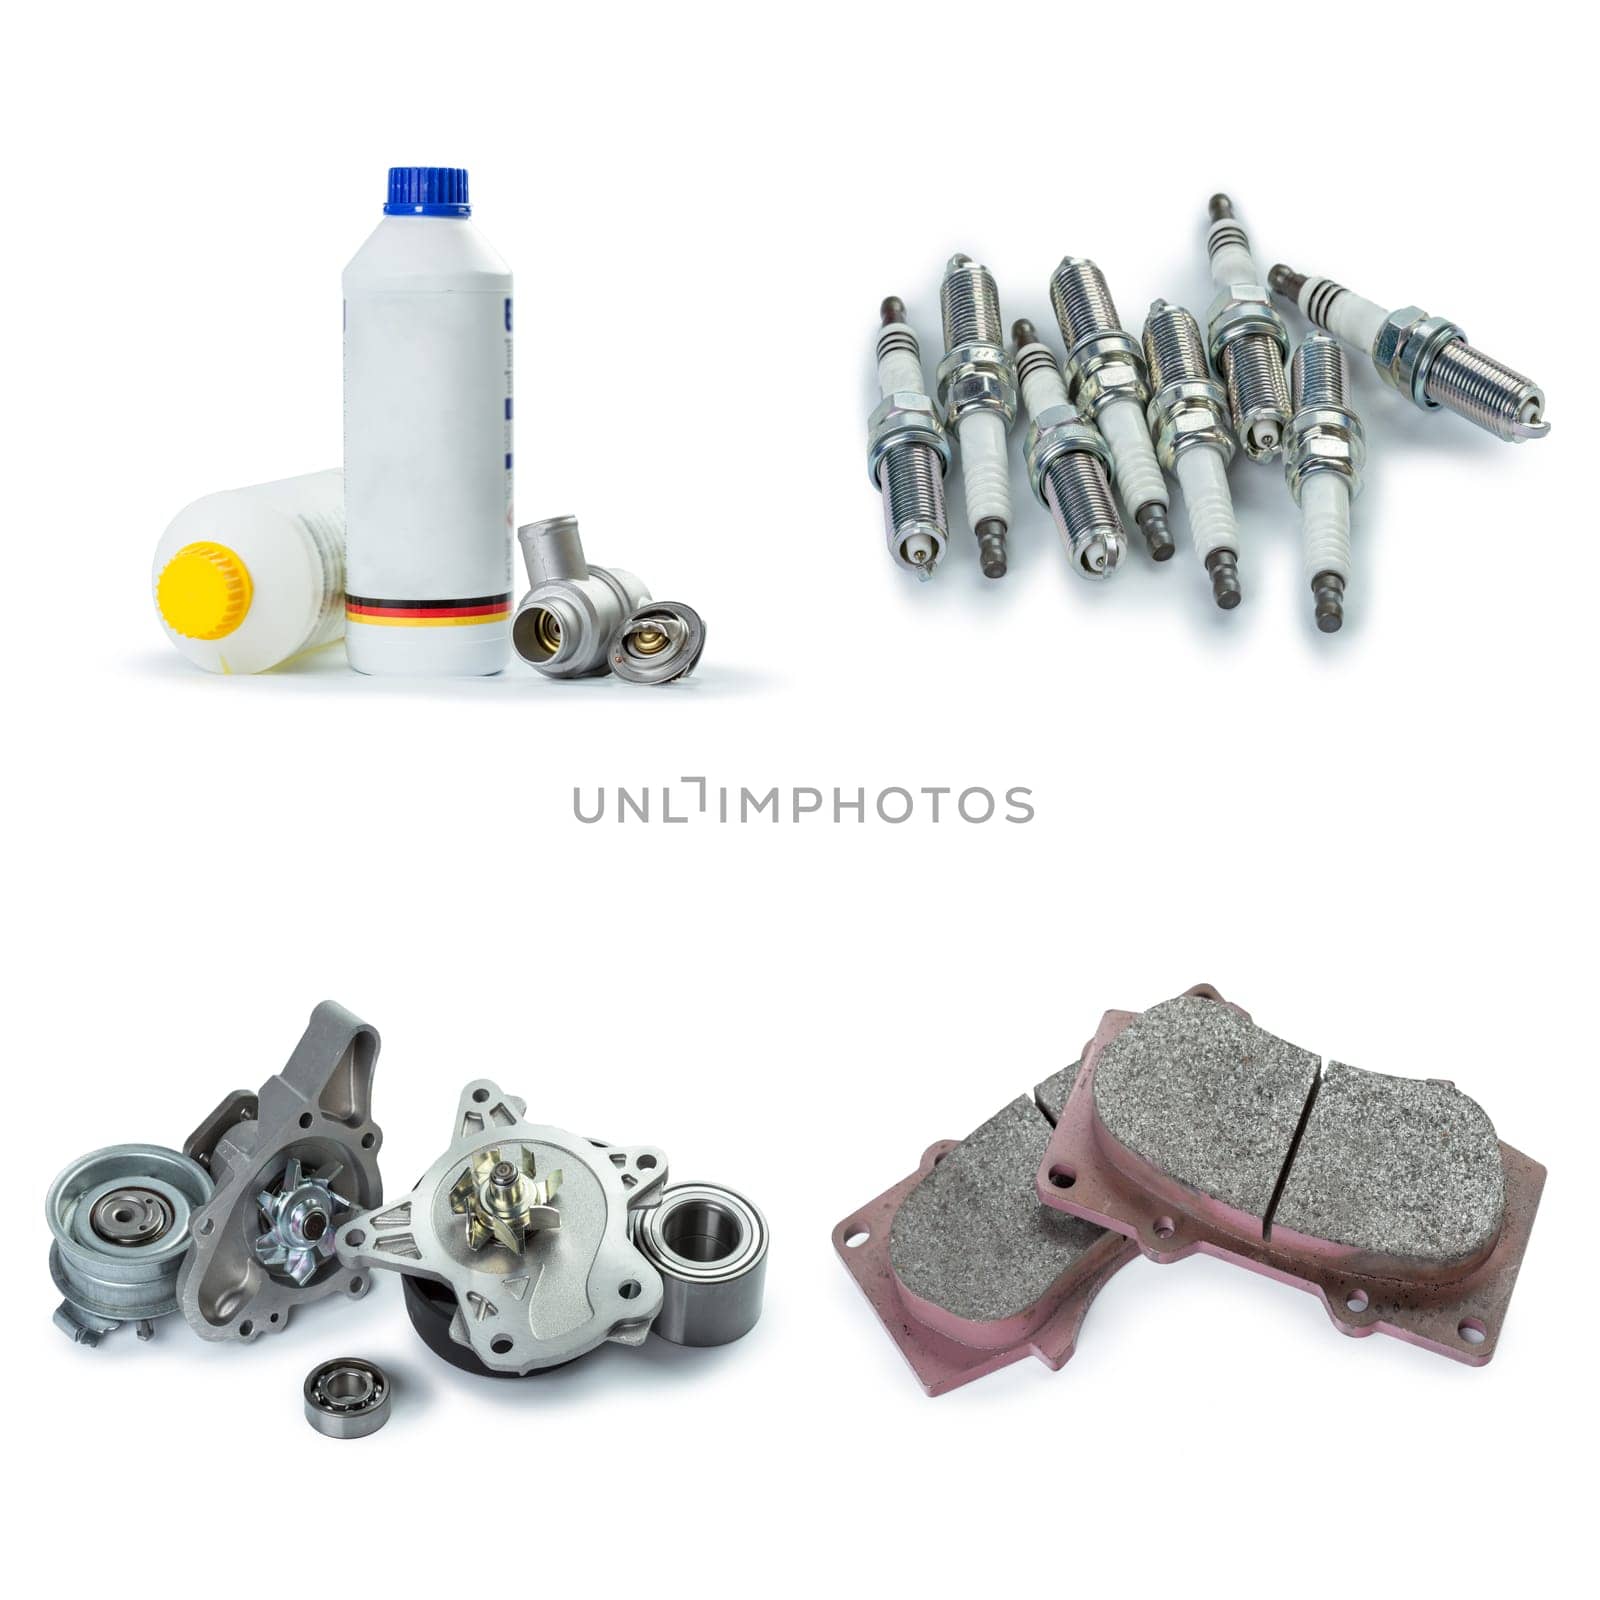 Various car parts necessary for vehicle service by Fabrikasimf